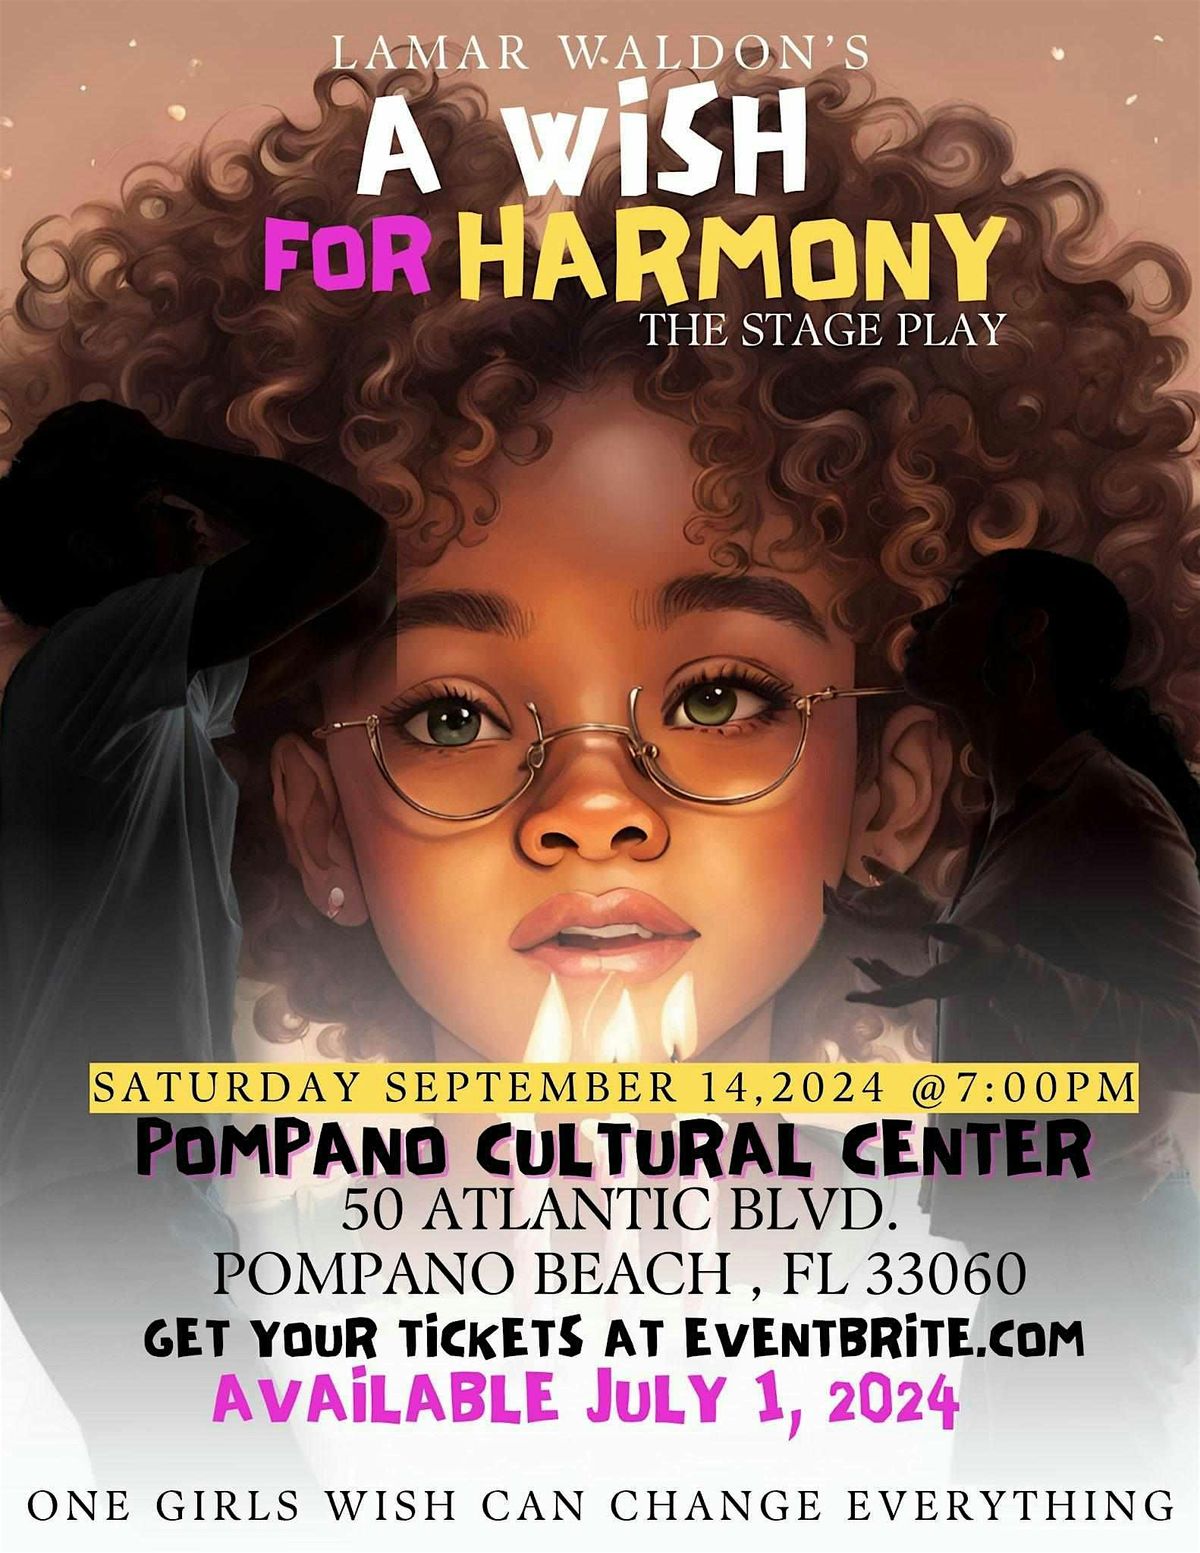 Lamar Waldon's "A Wish for Harmony" The Stage Play